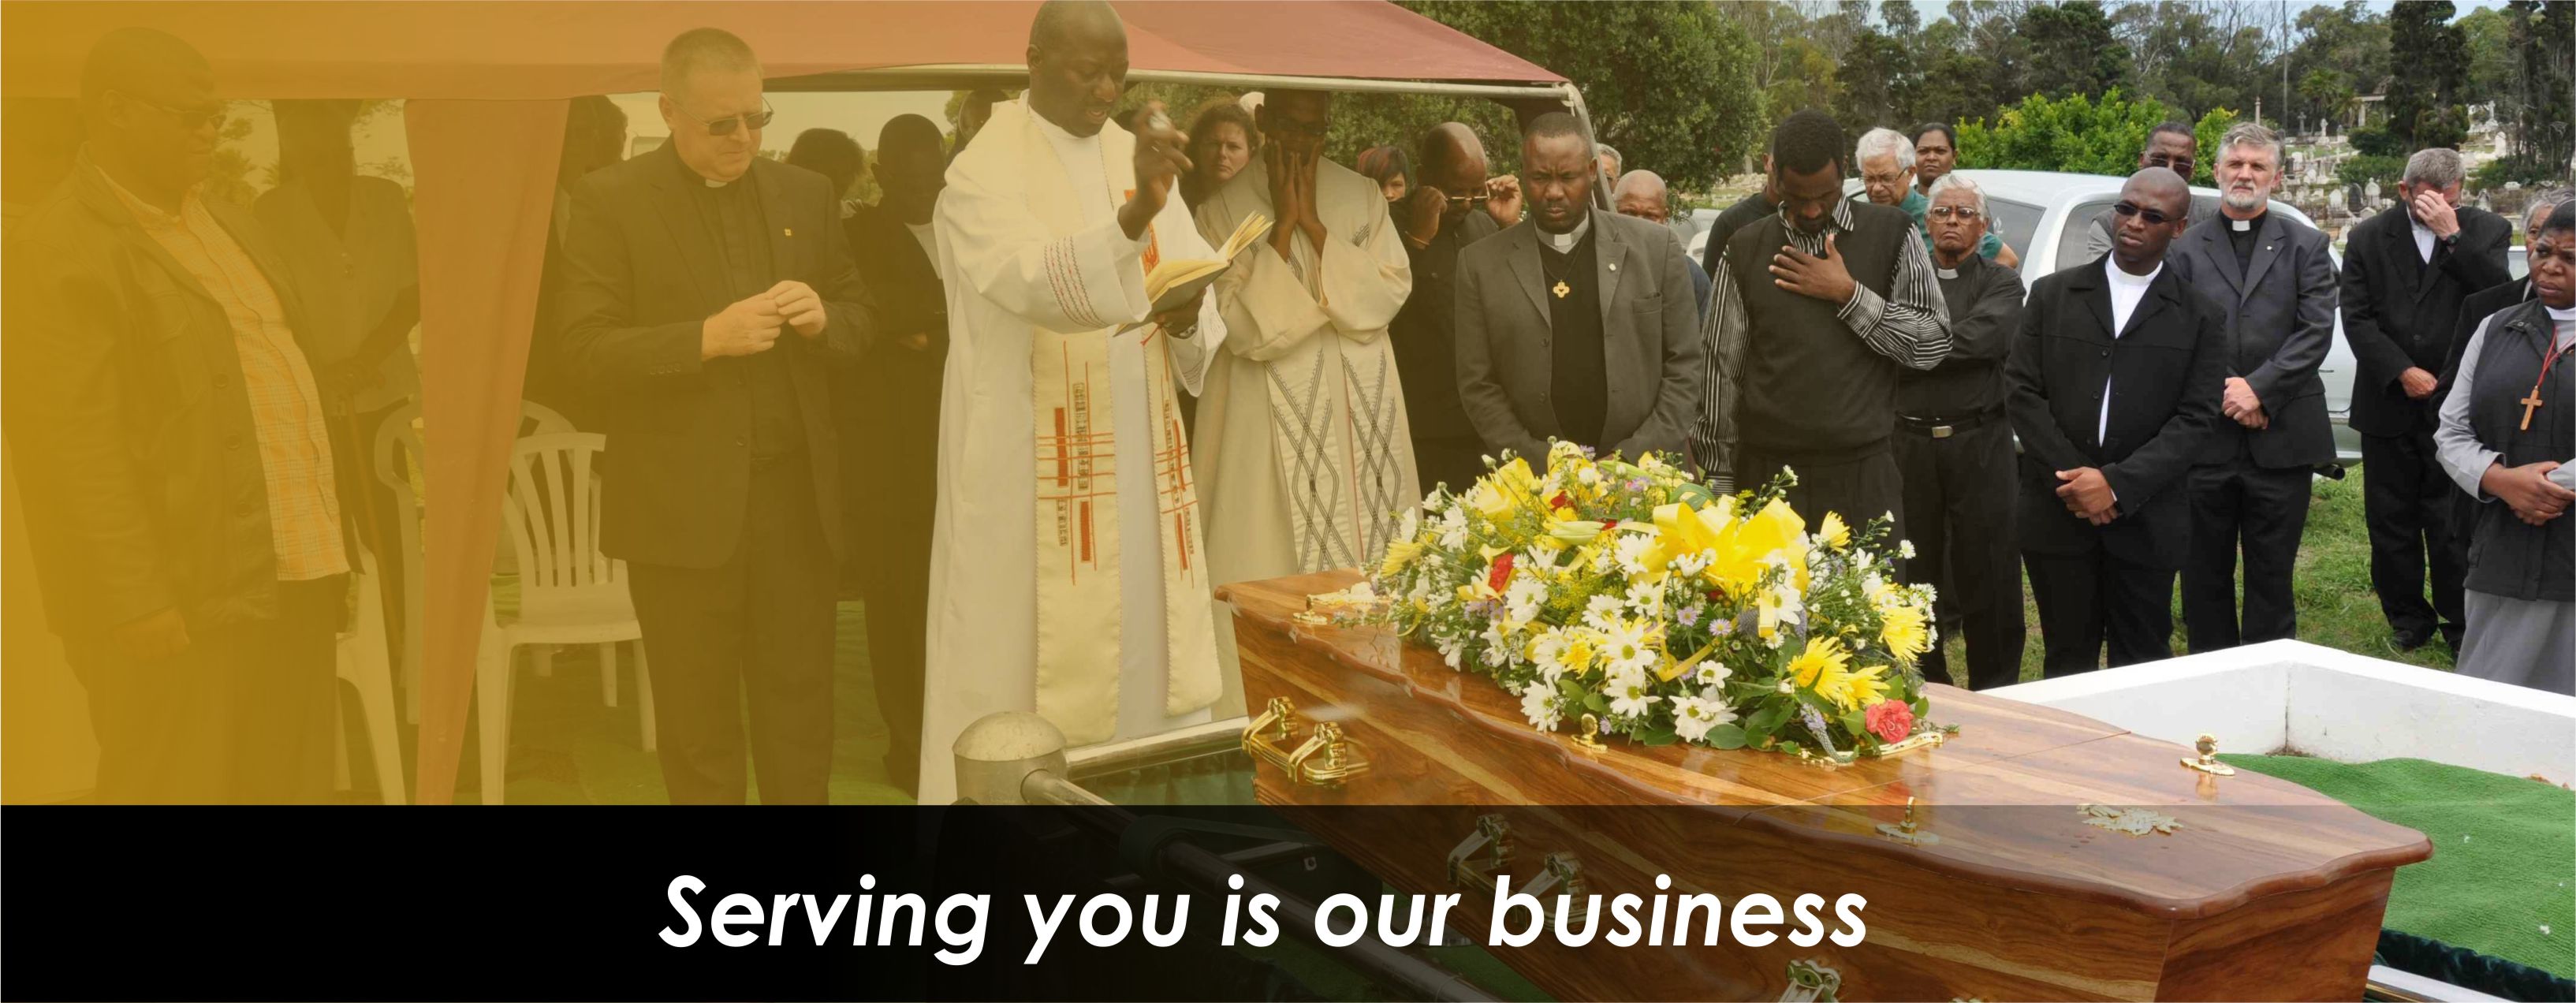 Funeral Services, Best Service:: Choose Ego Funerals